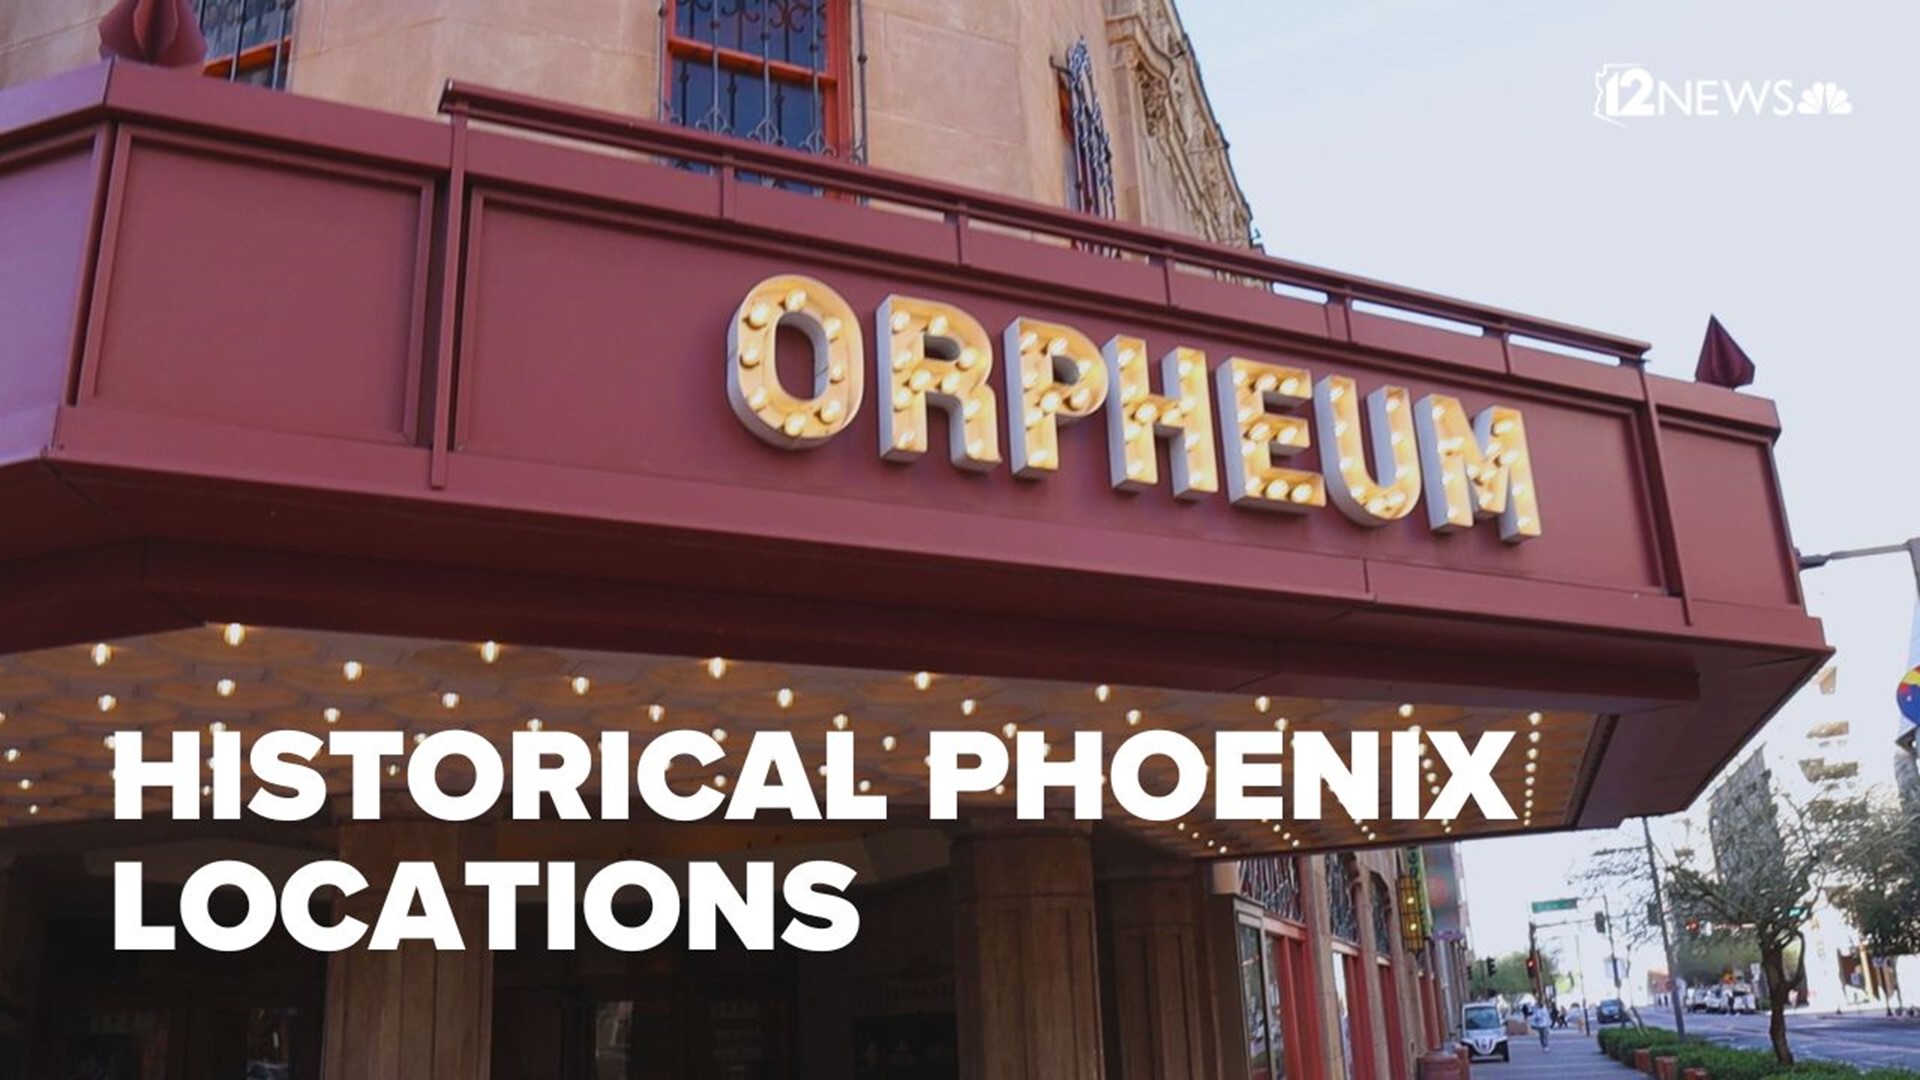 Official Phoenix Historian Steve Schumacher talks about some interesting facts about the city and five historical spots in the Valley of the Sun.